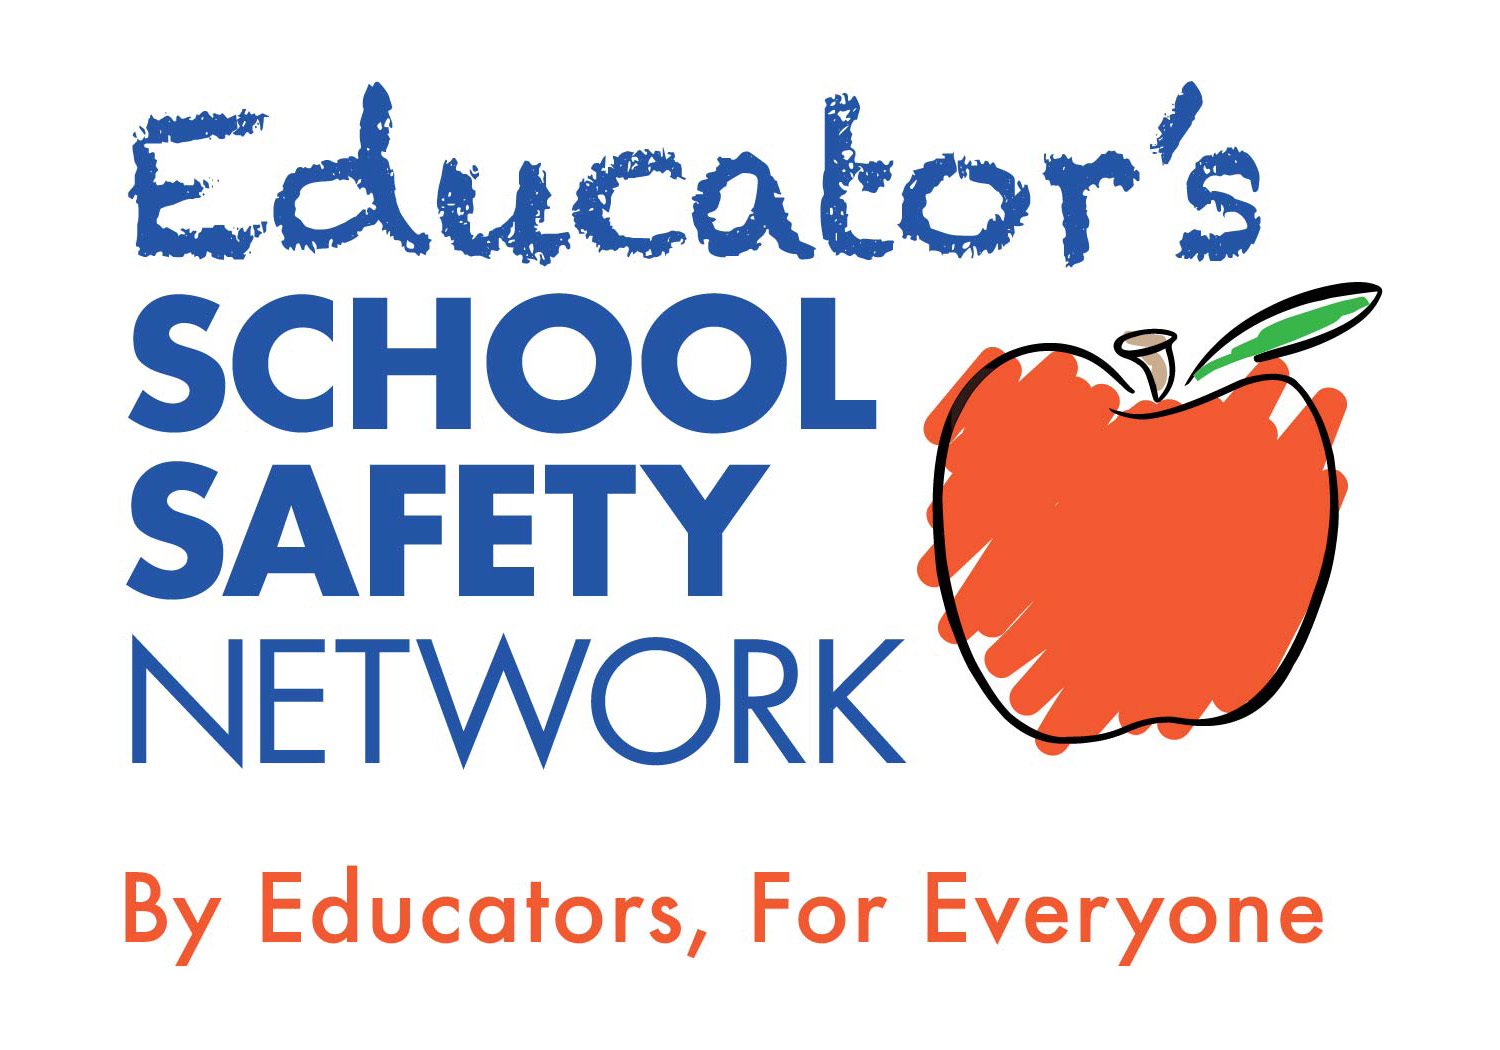 The Educator's School Safety Network